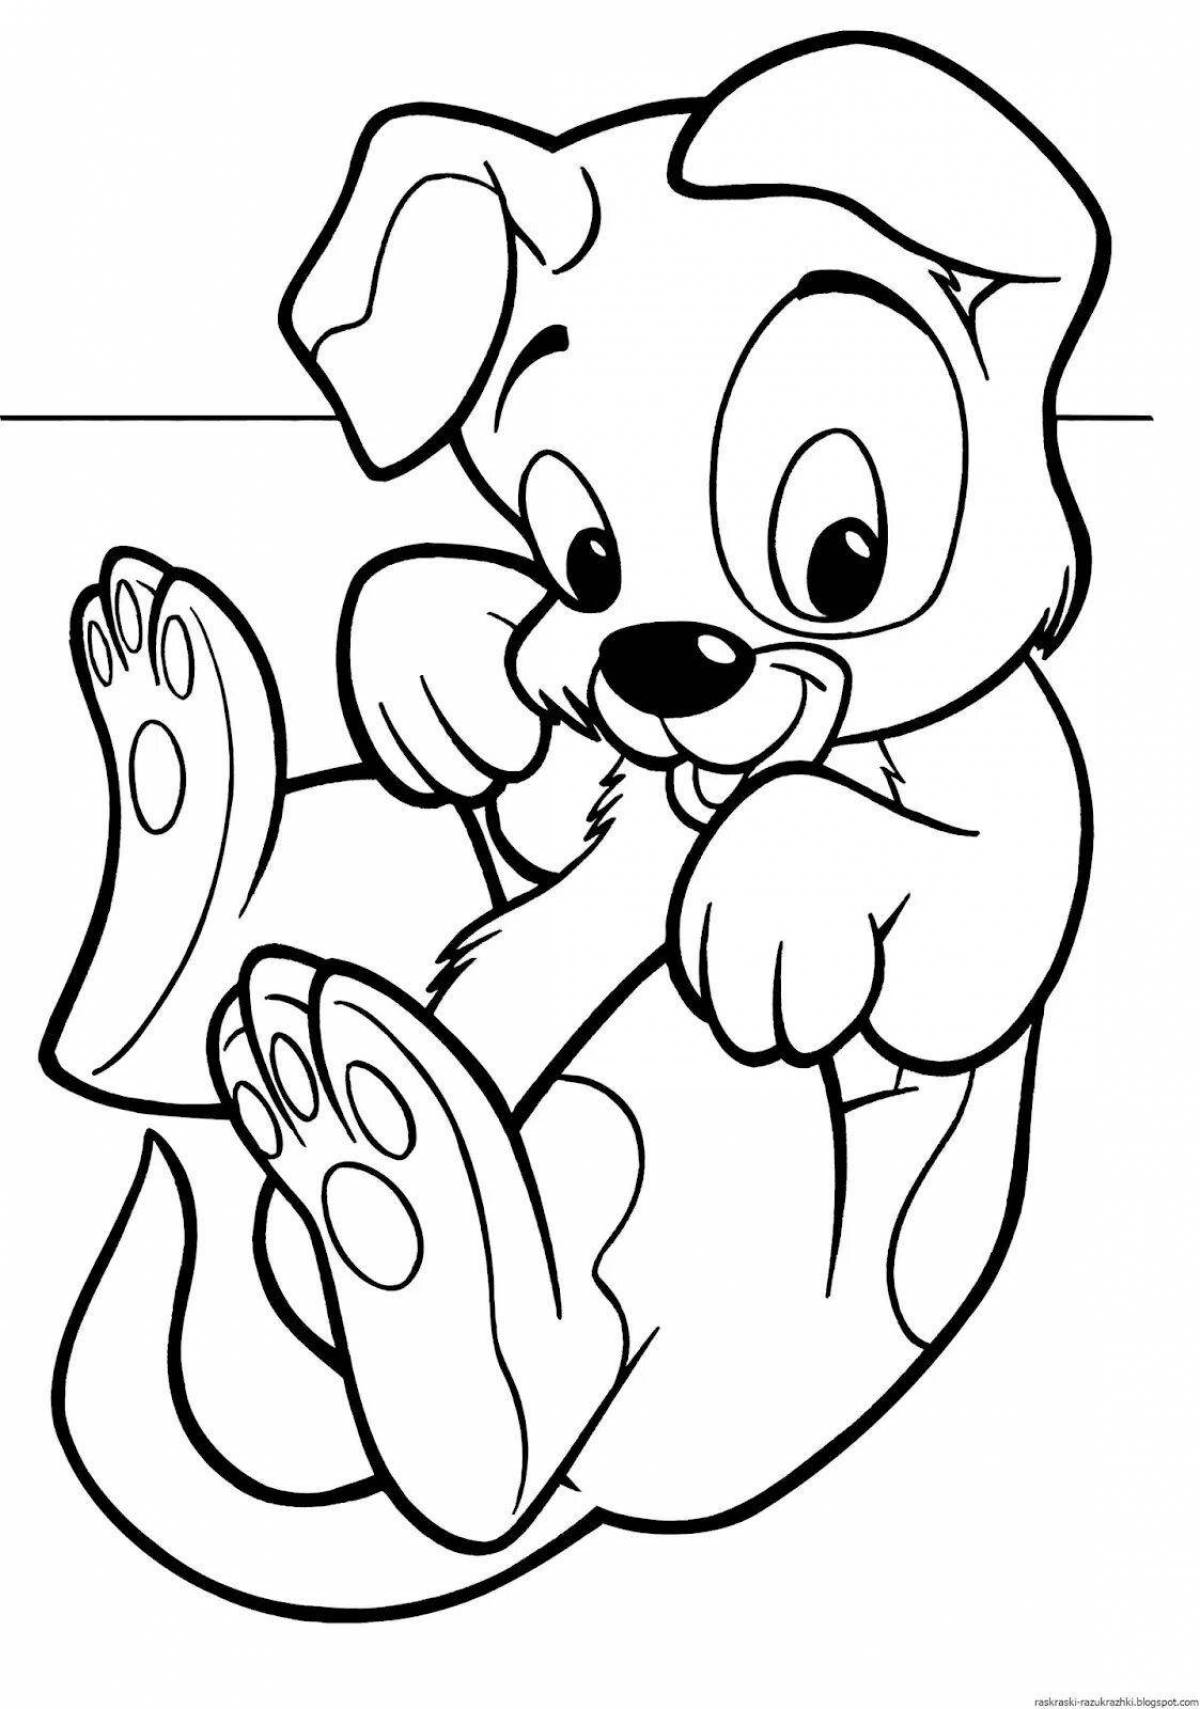 Snuggly coloring pages for girls